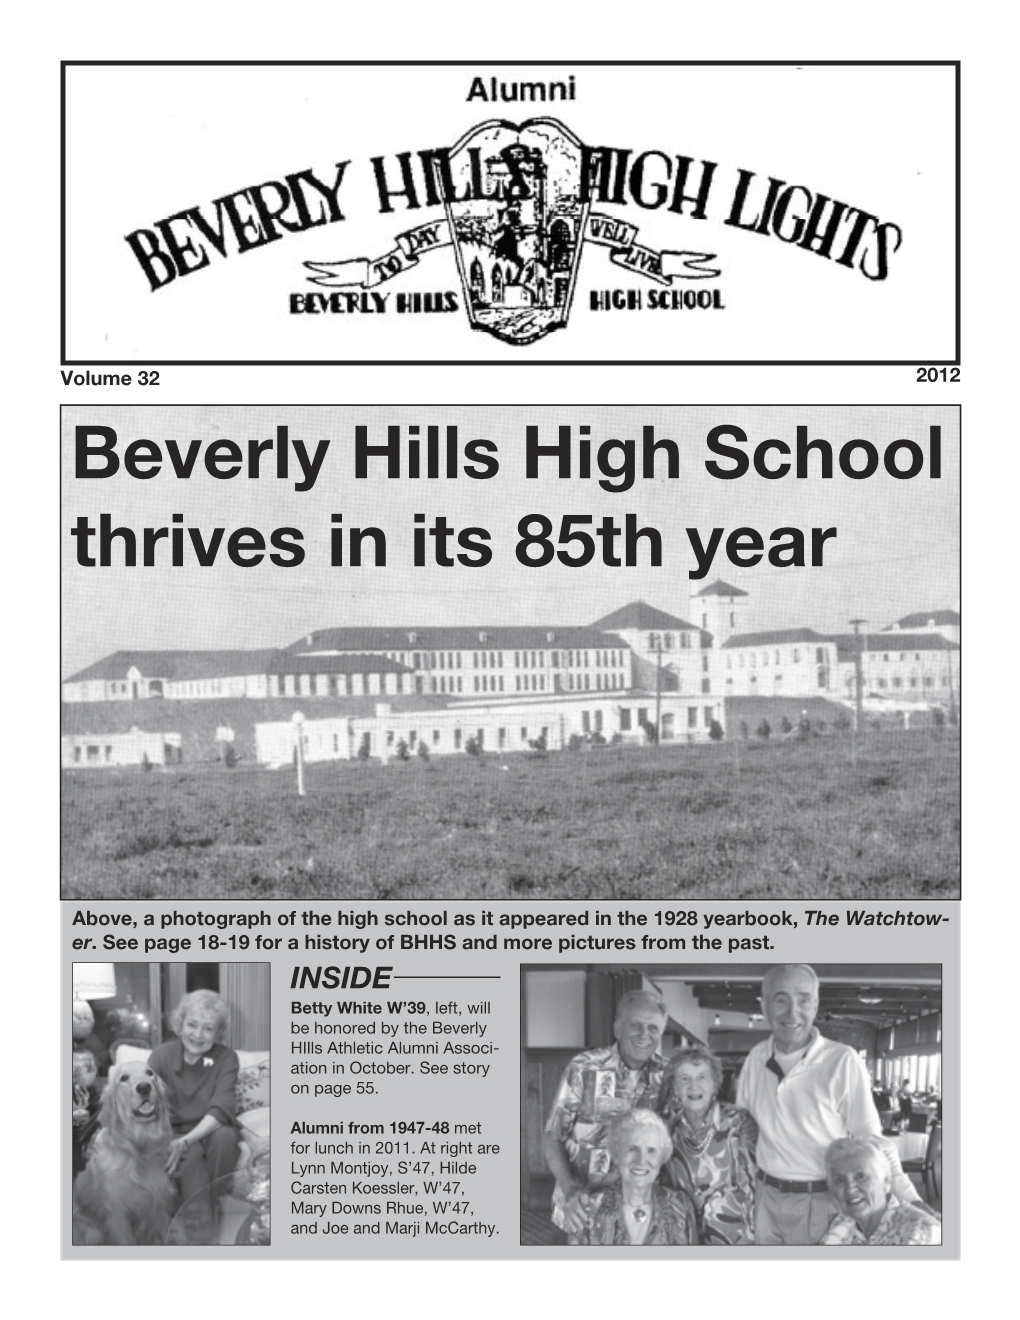 Beverly Hills High School Thrives in Its 85Th Year